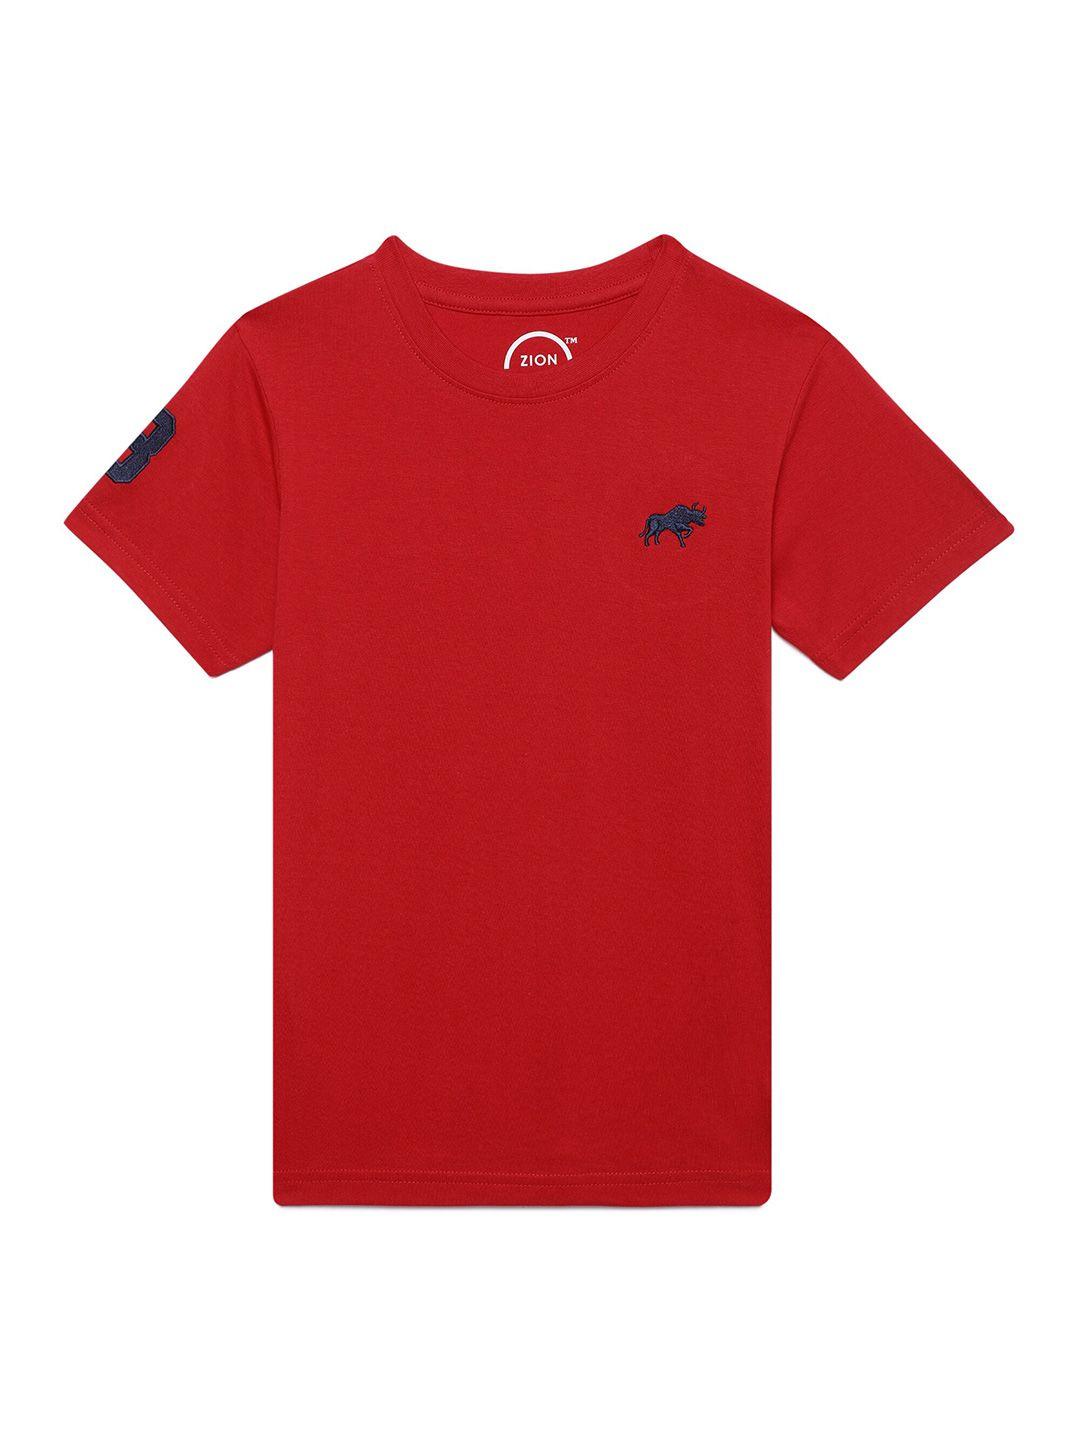 zion-boys-red-slim-fit-t-shirt